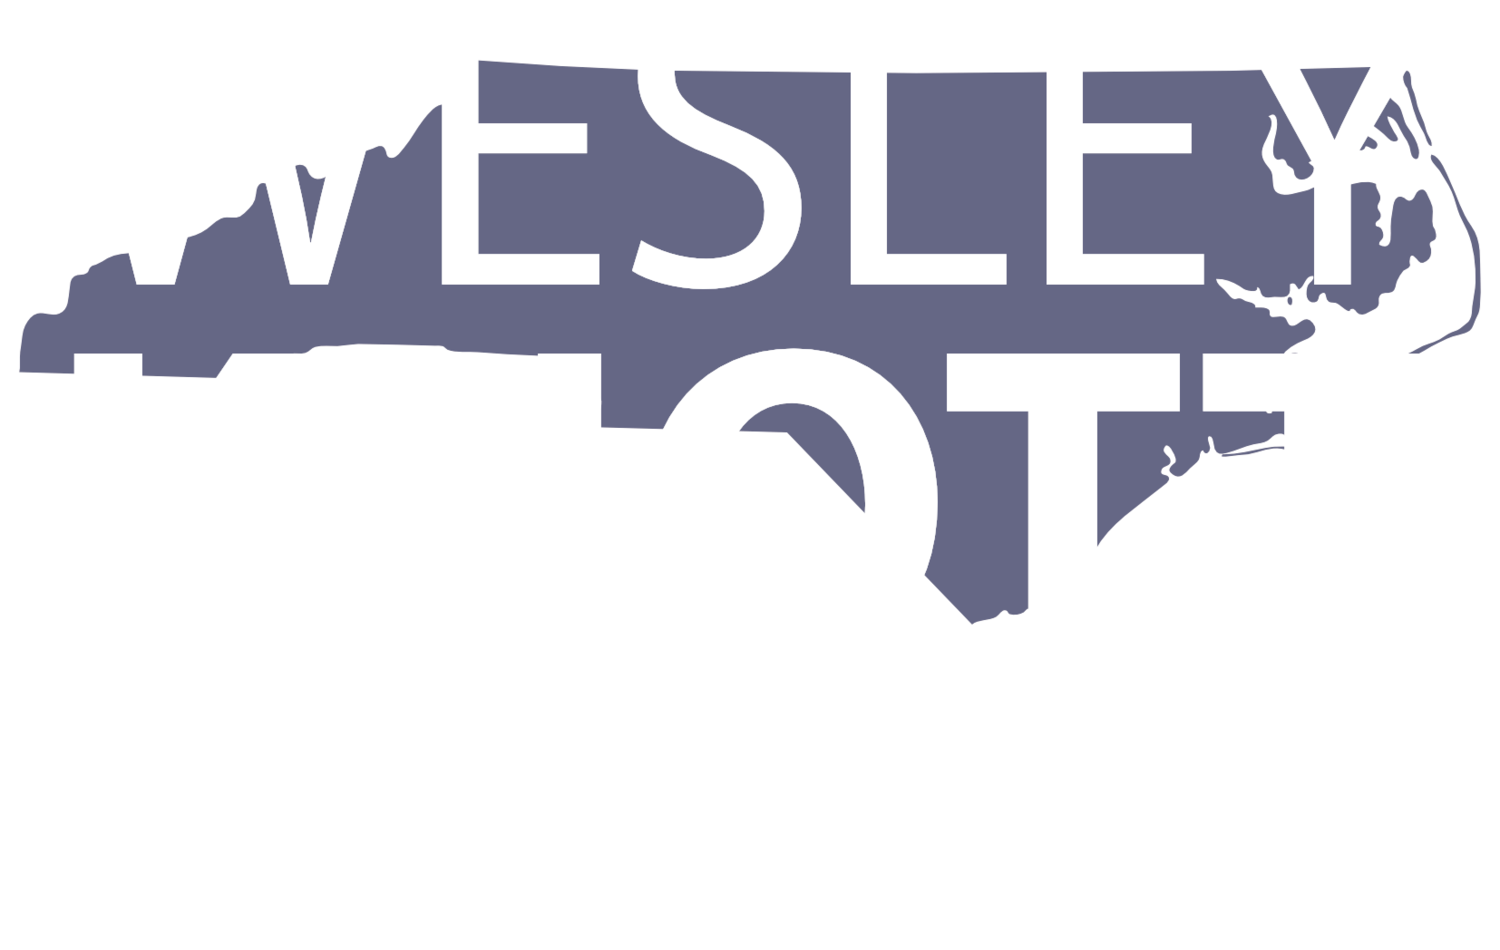 Wesley Knott for NC